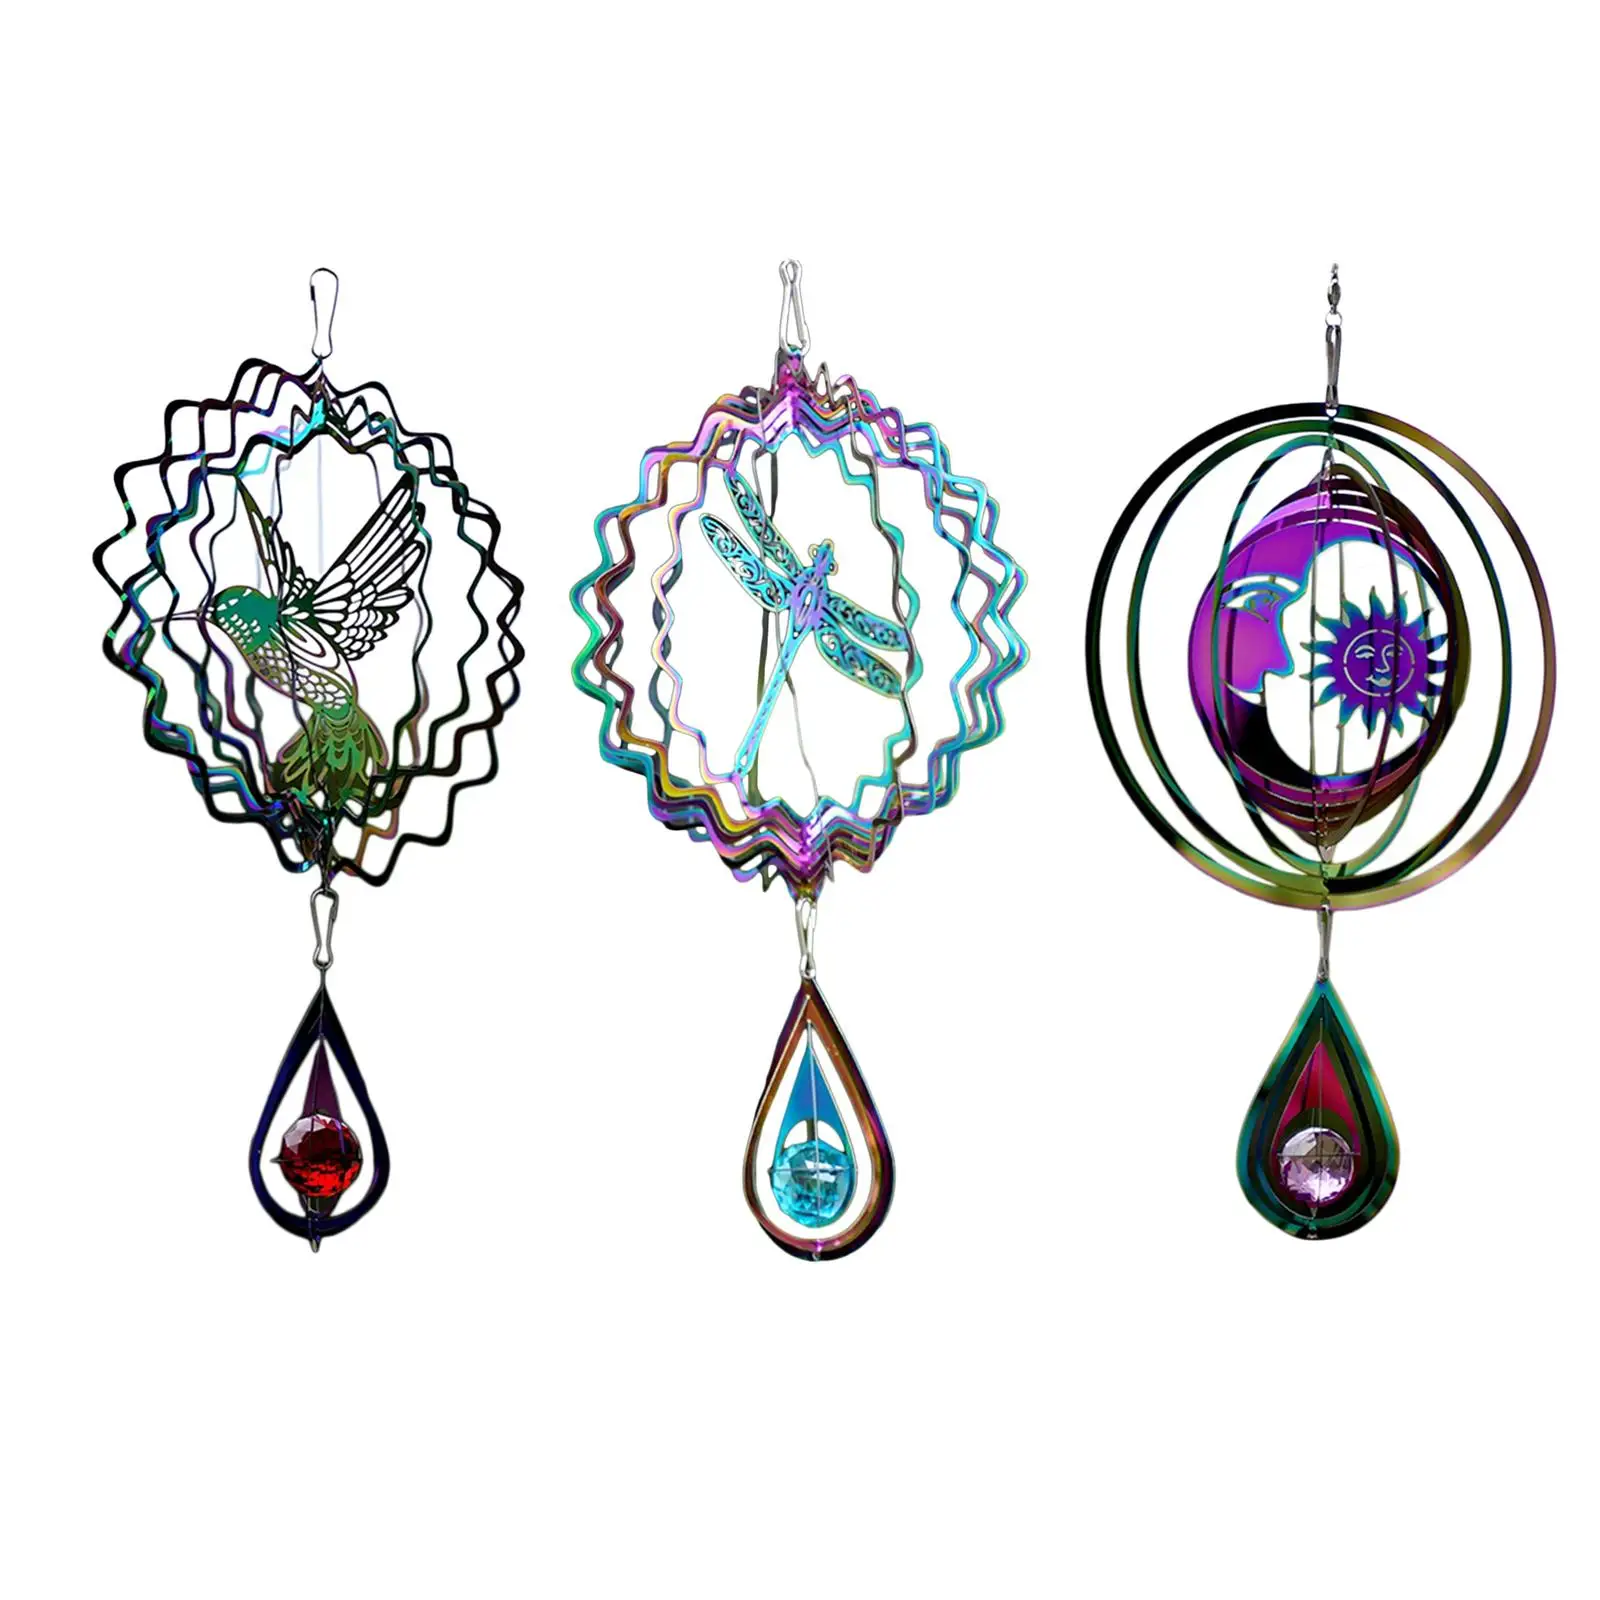 Metal Wind Spinner Garden Decorative Windchime for Patio Outside Living Room